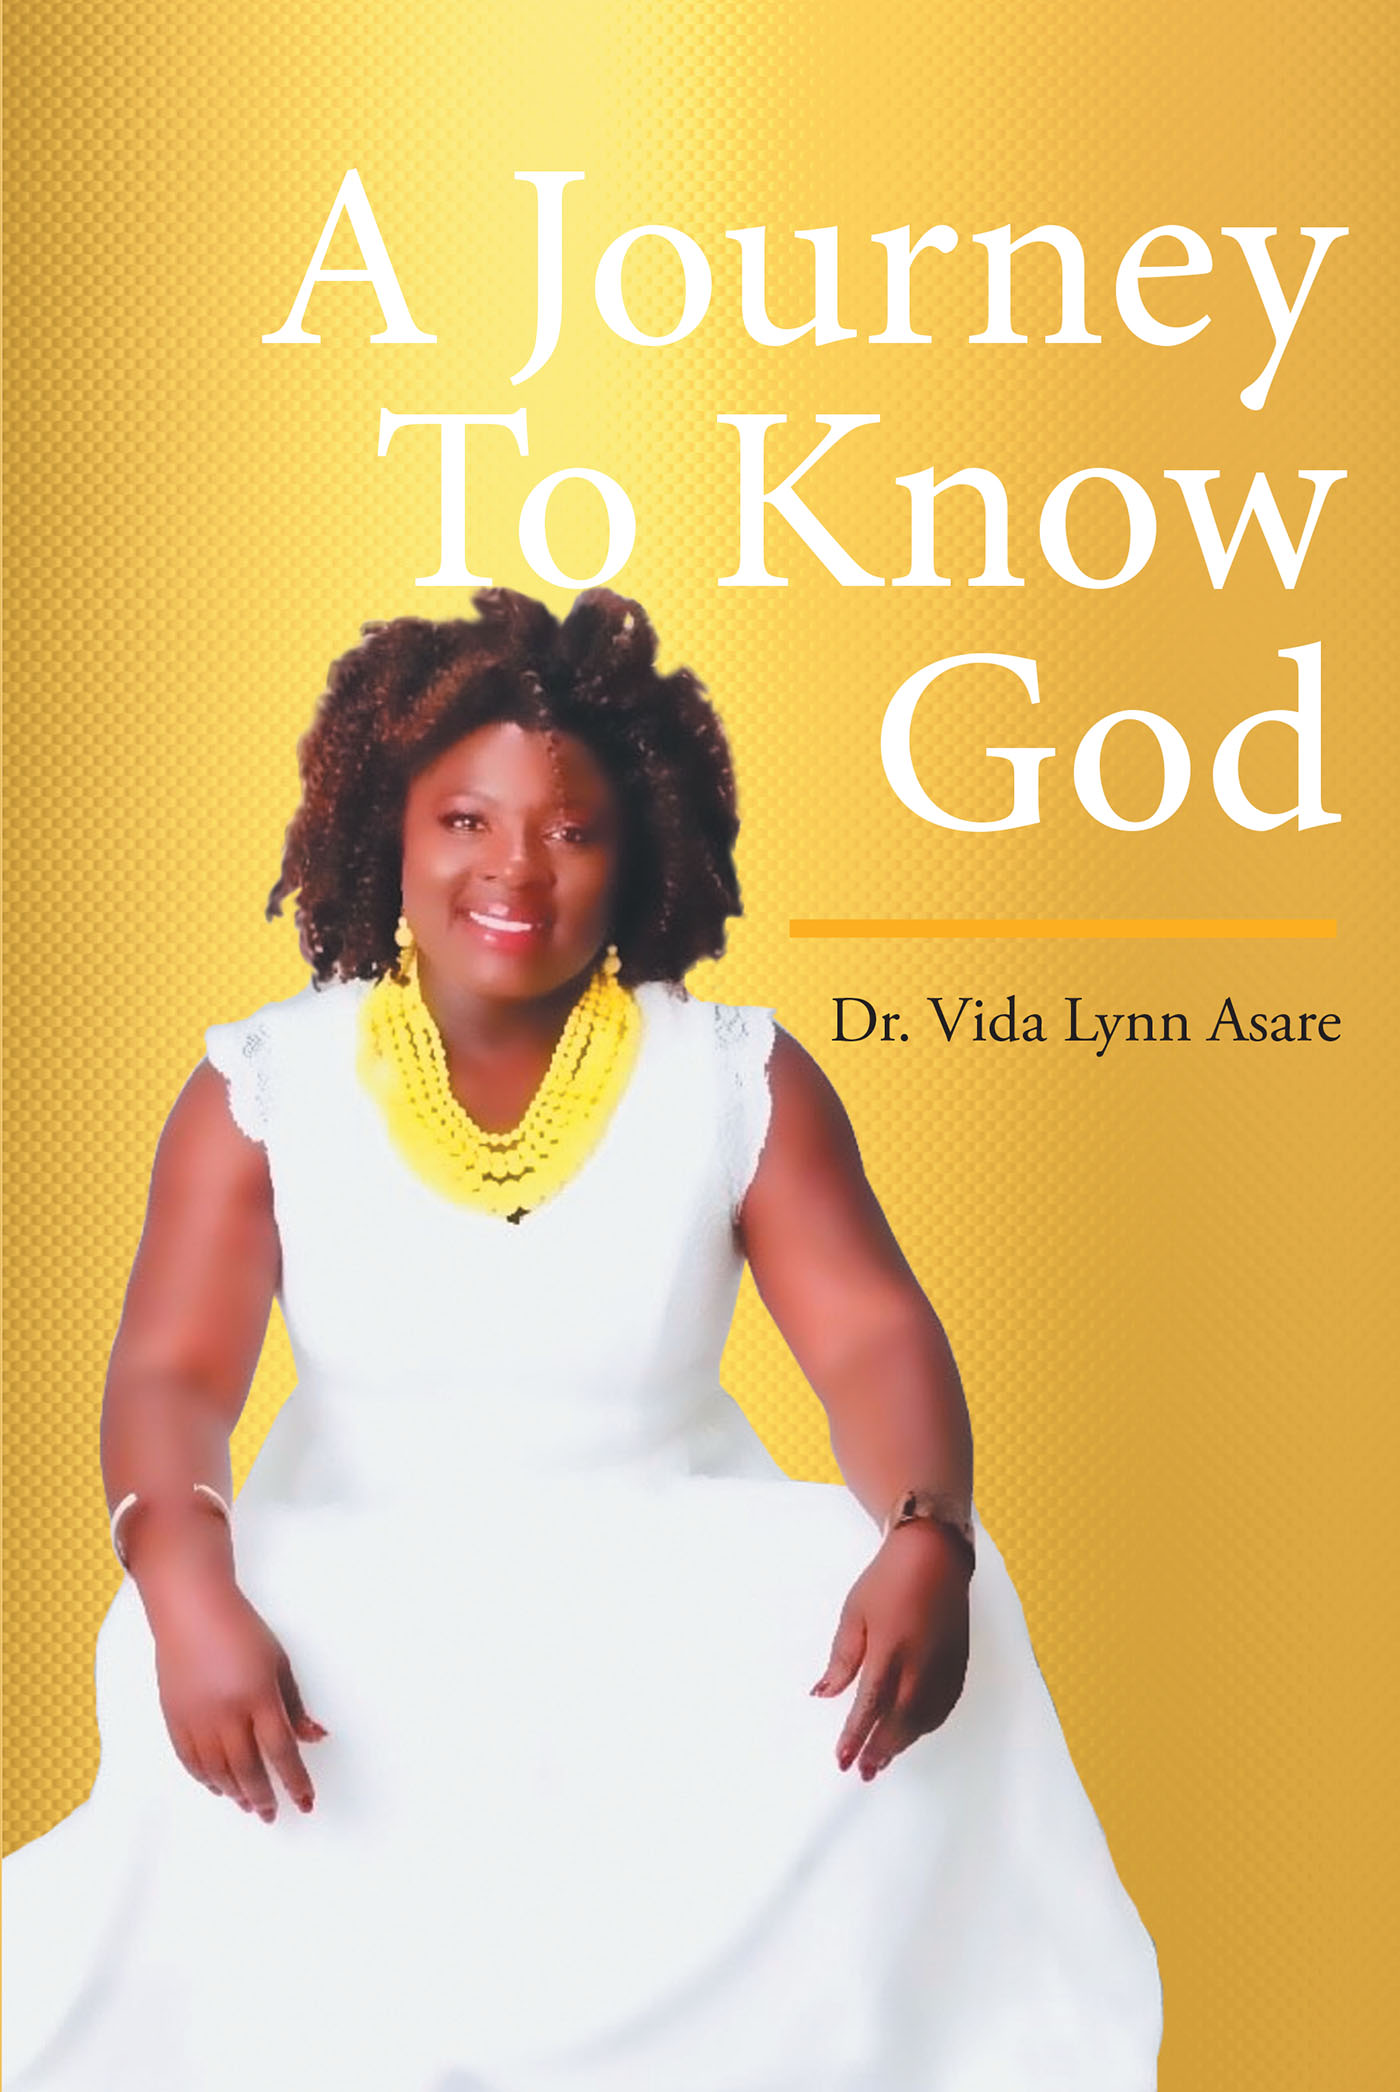 Dr. Vida Lynn Asare’s Newly Released "A Journey To Know God" is a Soul-Stirring Discussion of Profound Biblical Insights